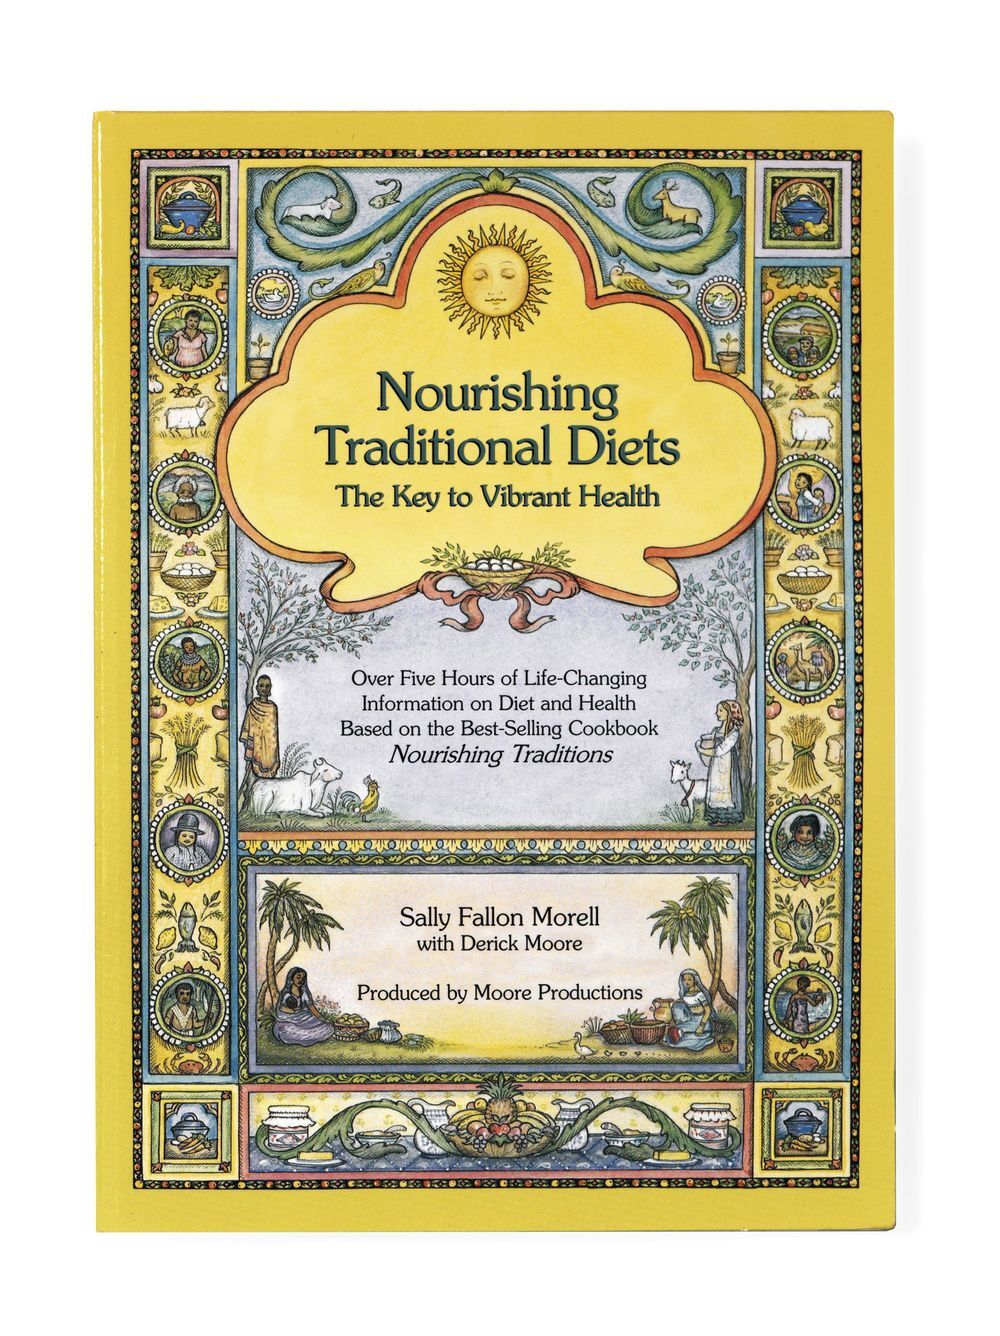 Nourishing Traditional Diets DVD